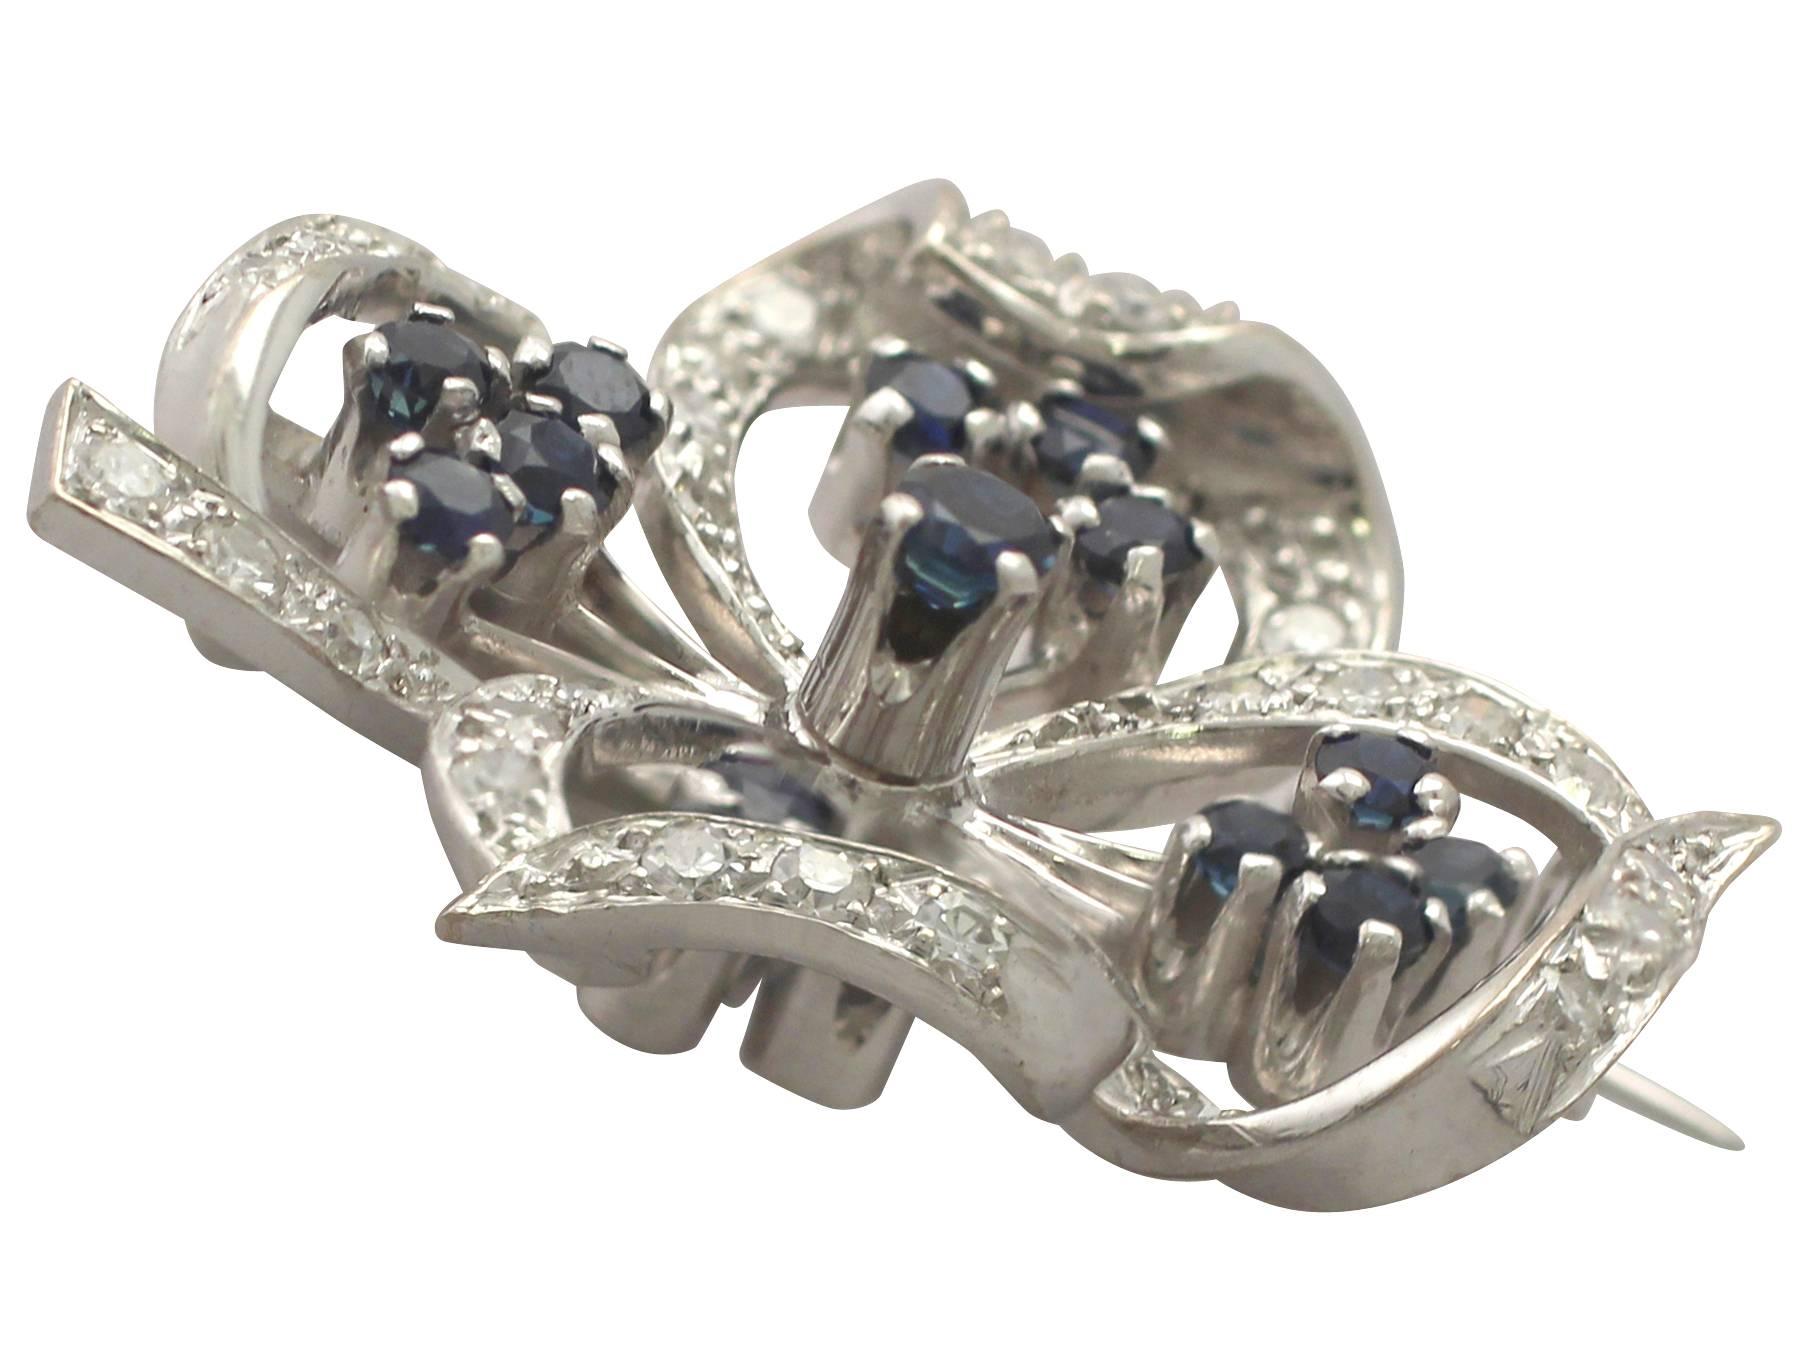 A fine and impressive 0.70 carat diamond and 0.51 carat blue sapphire, 18 carat white gold brooch in the form of a clover.

This fine and impressive vintage four leaf clover brooch has been crafted in 18 ct white gold.

The brooch has been crafted